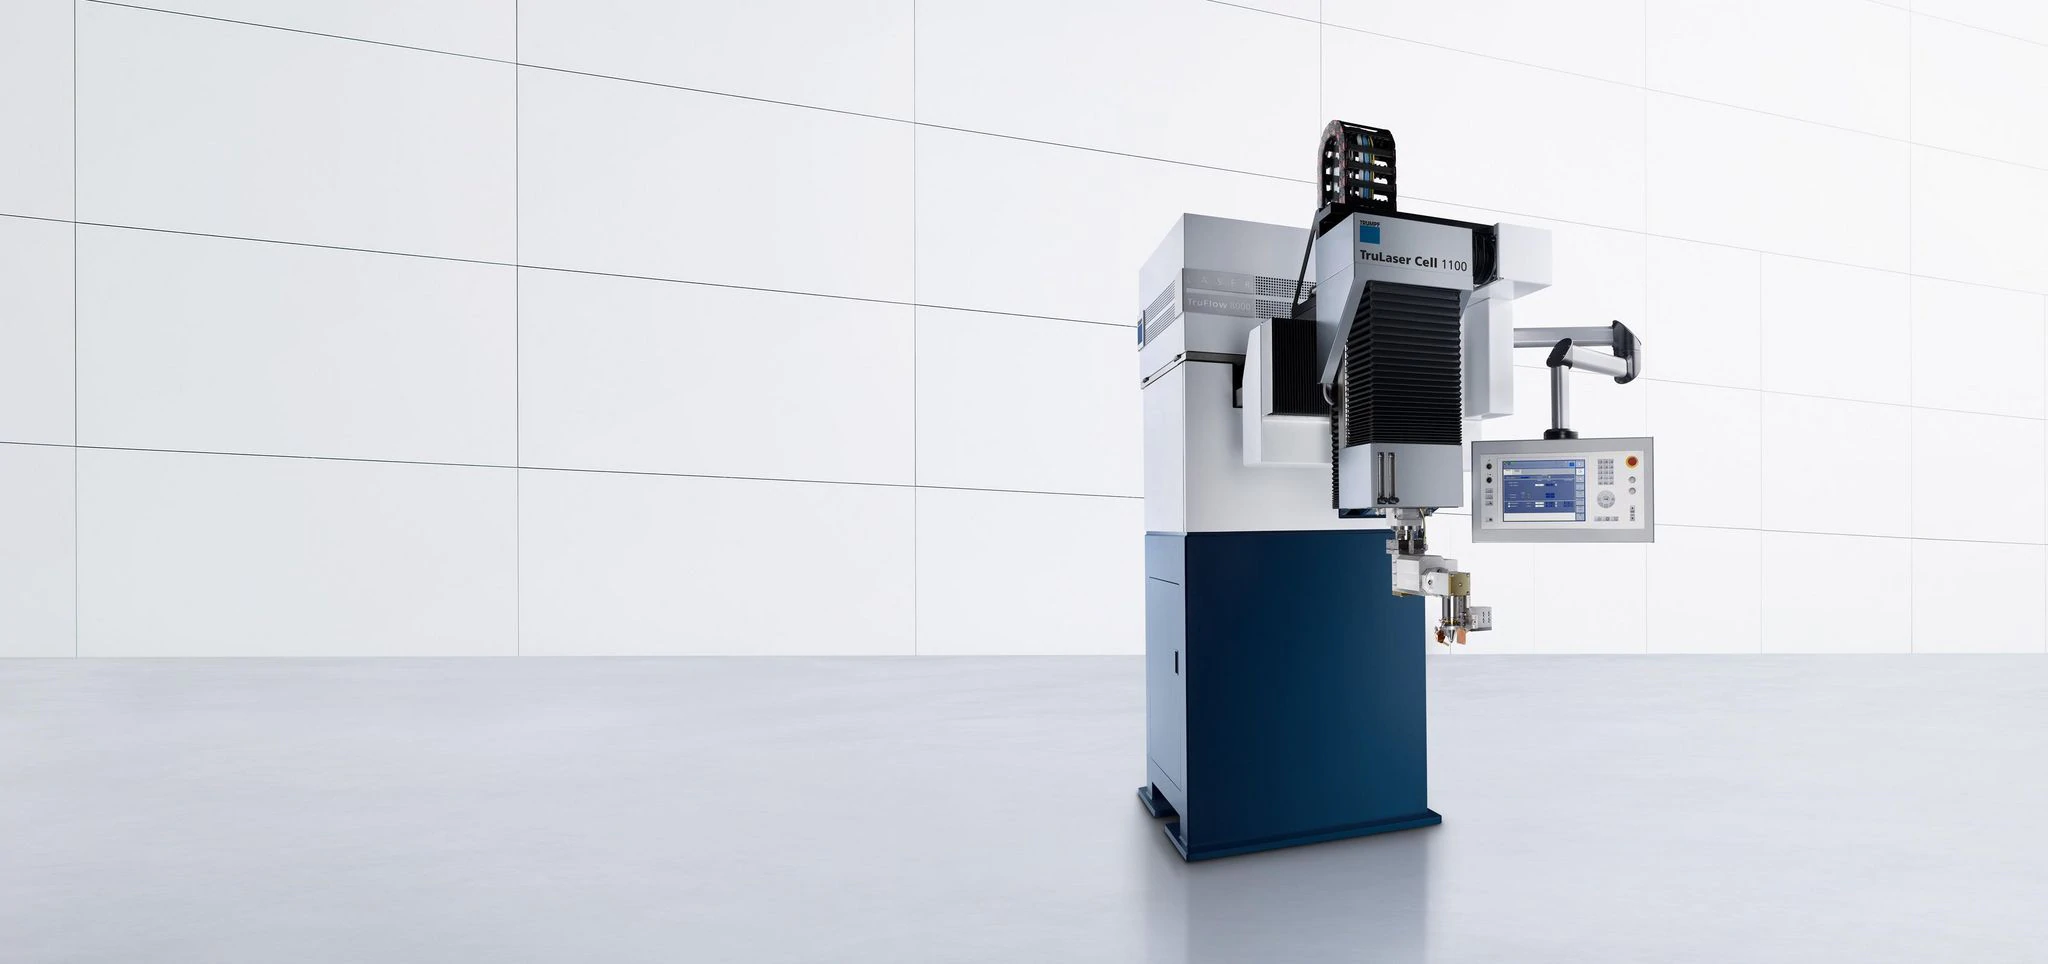 Expert for strips, tubes, and profiles
The TruLaser Cell 1100 is a flexible beam guidance system that you can integrate easily into your production line. It is specially designed for the endless welding of any seam geometry on strips, tubes, and profiles, as well as welding of rotationally symmetrical parts. You have a lot of freedom when it comes to the material. With the laser welding system you can weld steel, stainless steel, aluminum, and even non-ferrous metals, from a tenth of a millimeter up to several millimeters thick. The flexibility, quality, and reliability are increased through the wide range of welding optics with linear or swivel axes, as well as sensor systems for seam detection and tracking (e.g. SeamLine or SeamLine Pro). Depending on the application and material, either CO2 or solid-state lasers from TRUMPF are used.
 